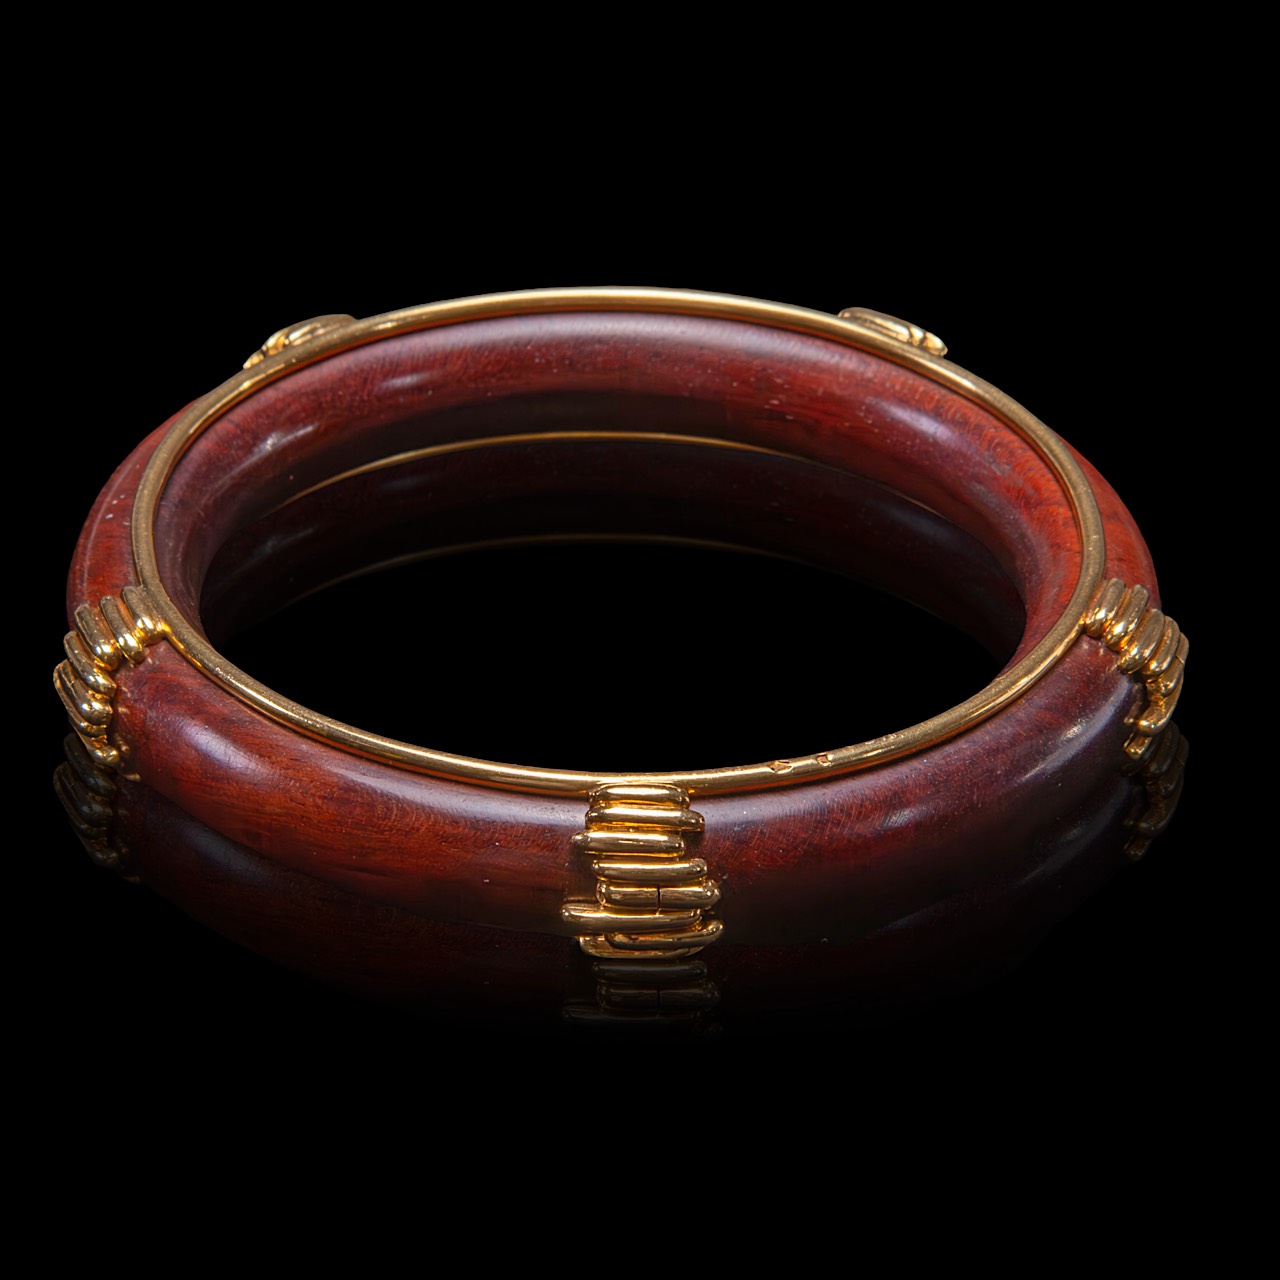 Van Cleef & Arpels, a wood and gold bangle bracelet, 18ct gold, signed VCA, Inner circumference 20 c - Image 5 of 7